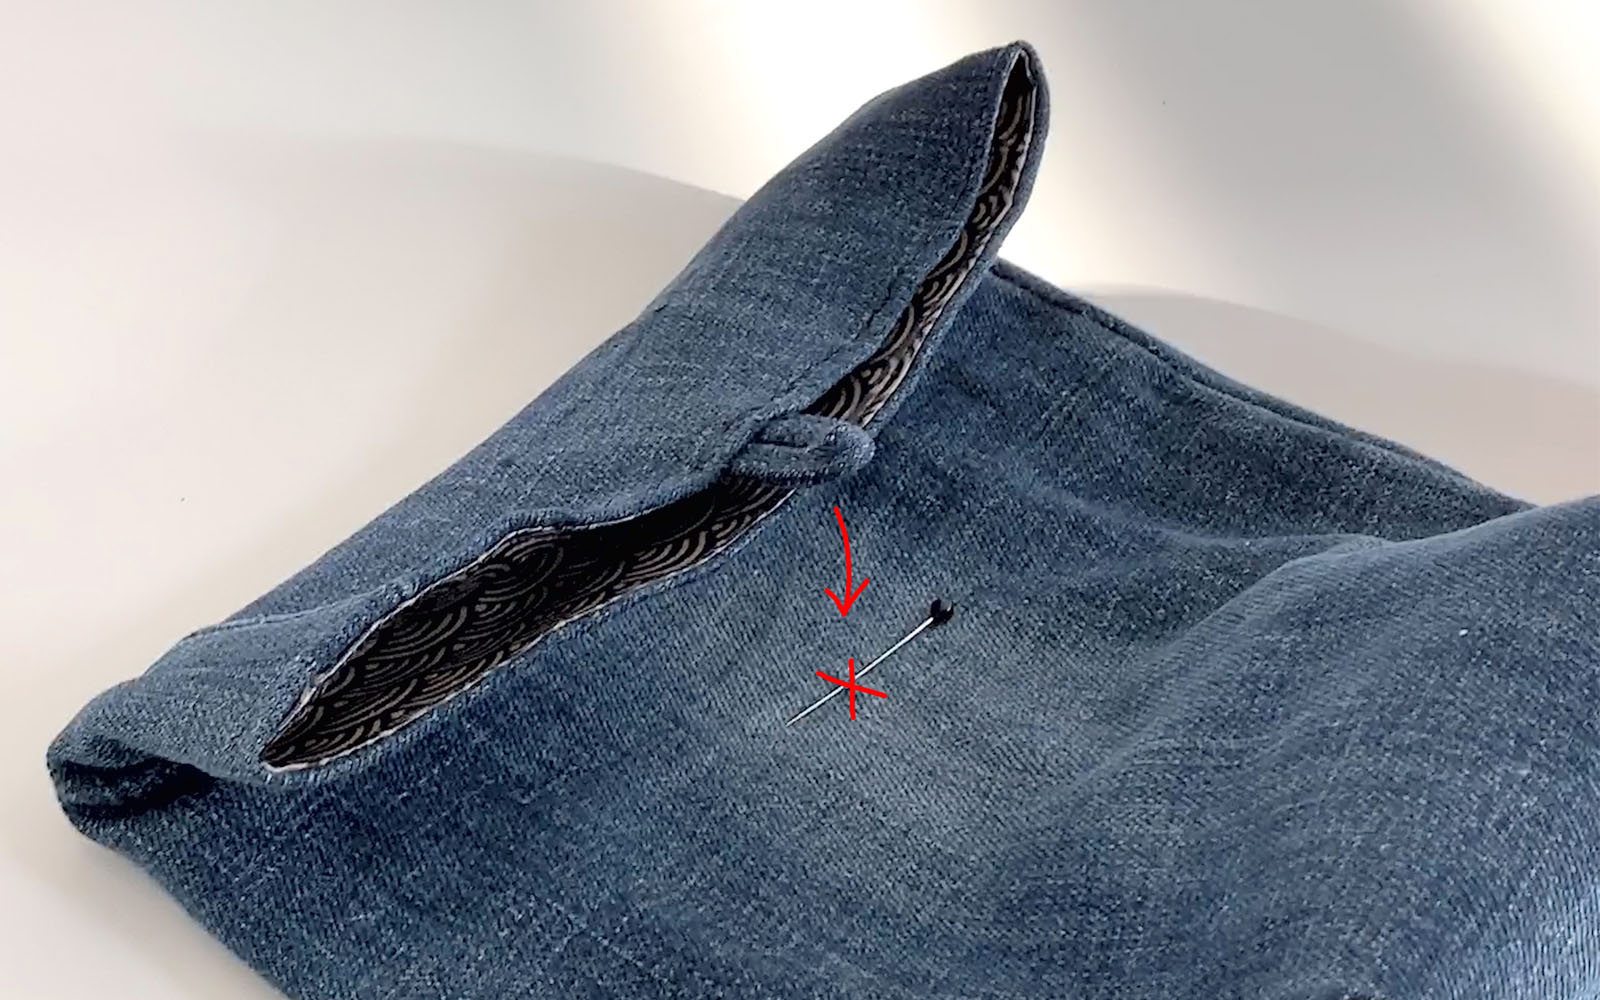 small denim bag with pin where button needs to be sewn to close